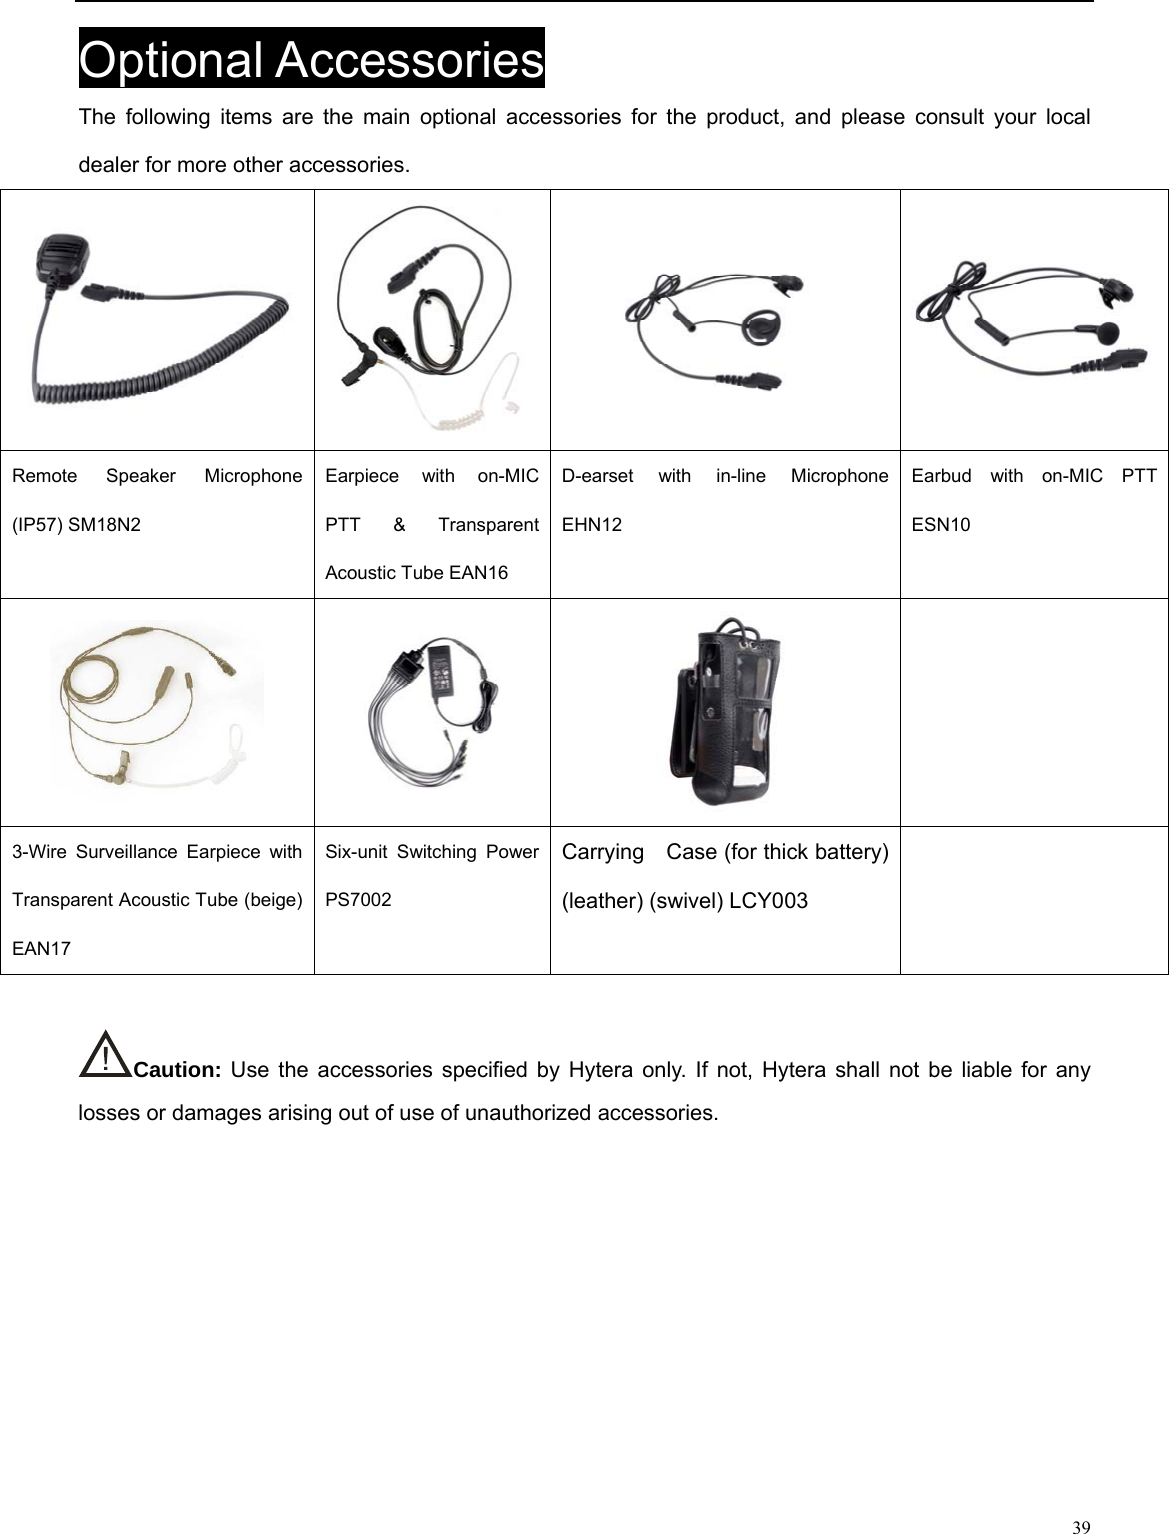                                                                                                            Optional Accessories The following items are the main optional accessories for the product, and please consult your local dealer for more other accessories.  Remote Speaker Microphone (IP57) SM18N2   Earpiece with on-MIC PTT &amp; Transparent Acoustic Tube EAN16   D-earset with in-line Microphone EHN12 Earbud with on-MIC PTT ESN10        Carrying    Case (for thick battery) (leather) (swivel) LCY003 3-Wire Surveillance Earpiece with Transparent Acoustic Tube (beige) EAN17 Six-unit Switching Power PS7002    Caution: Use the accessories specified by Hytera only. If not, Hytera shall not be liable for any losses or damages arising out of use of unauthorized accessories.               39